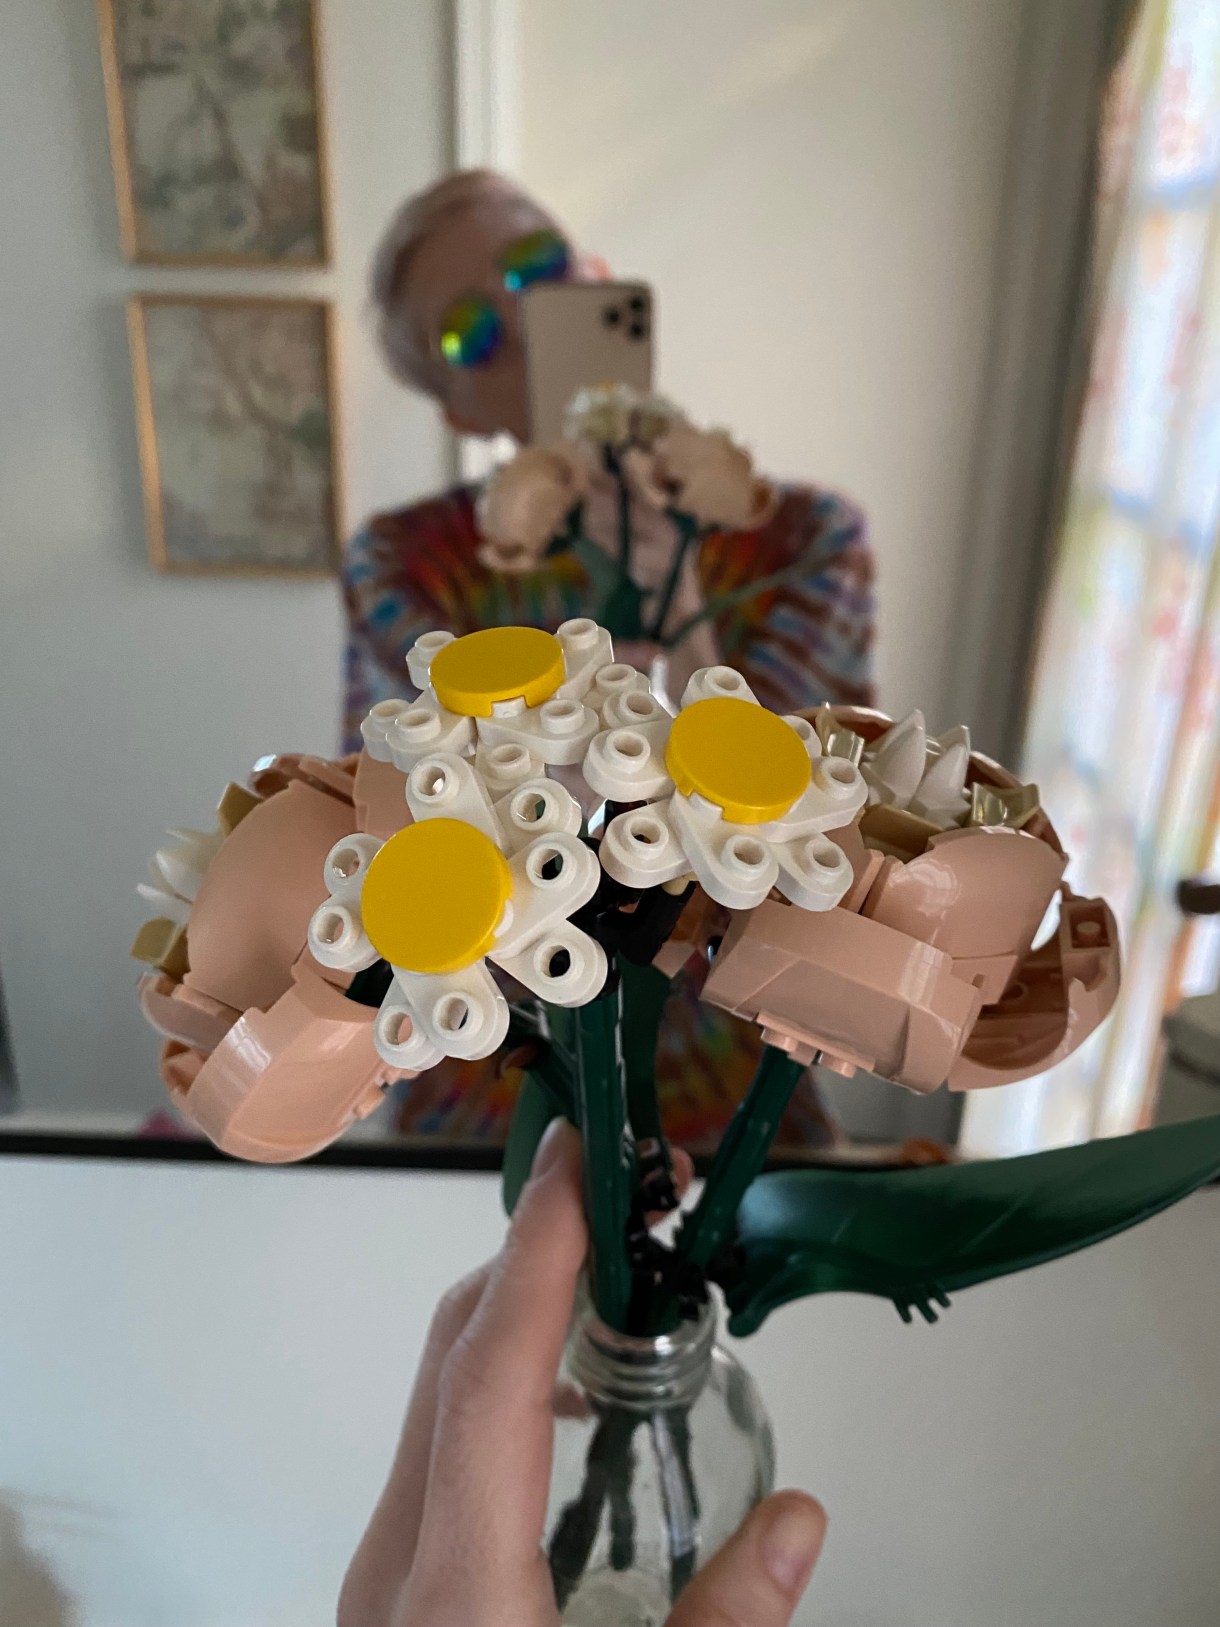 Laneia is a white woman and is holding up a bouquet of lego flowers to a mirror, and is out of focus in the background wearing sunglasses and a tie dye shirt.